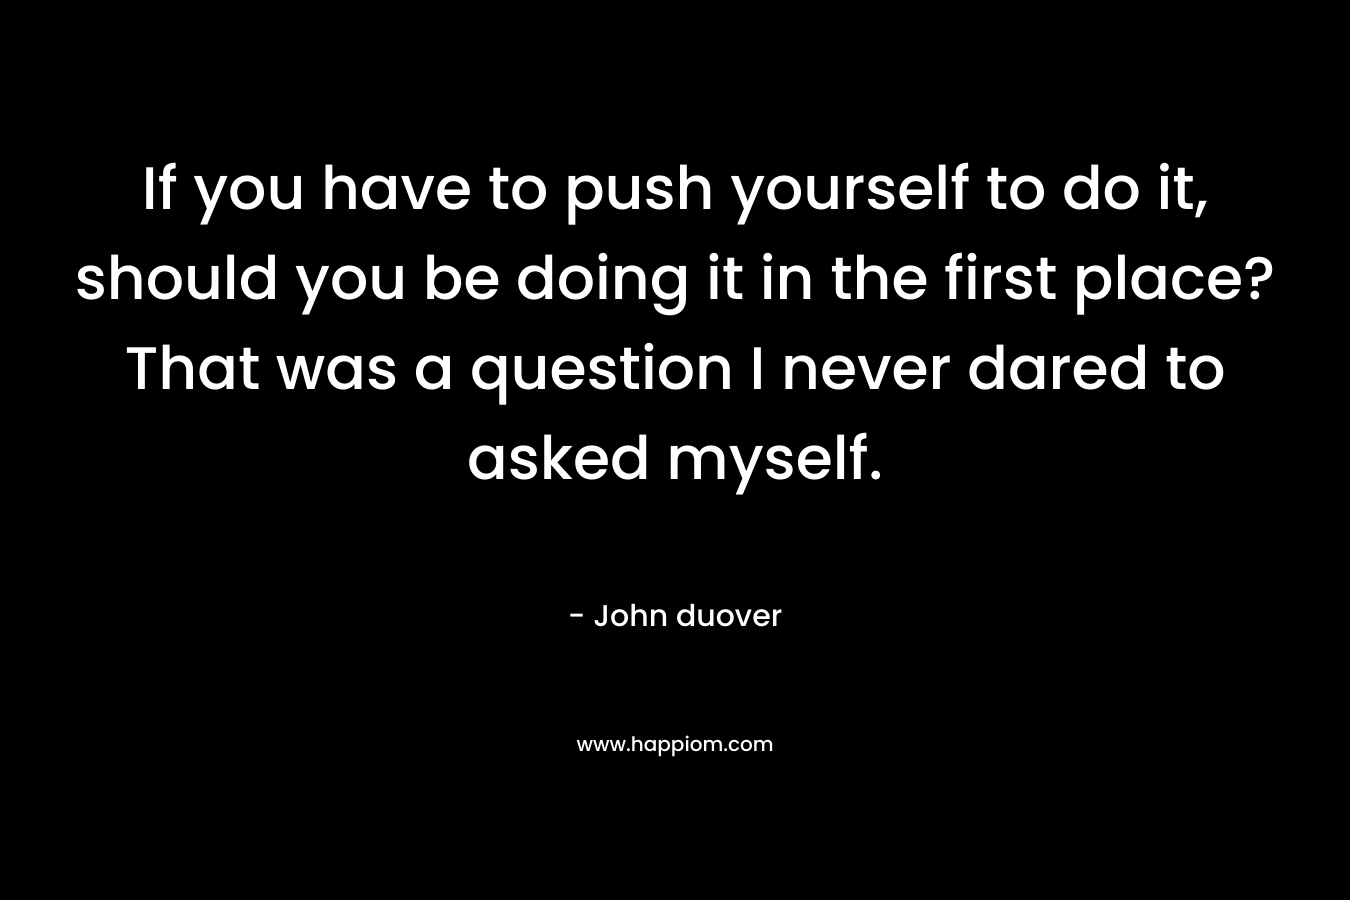 If you have to push yourself to do it, should you be doing it in the first place? That was a question I never dared to asked myself. – John duover